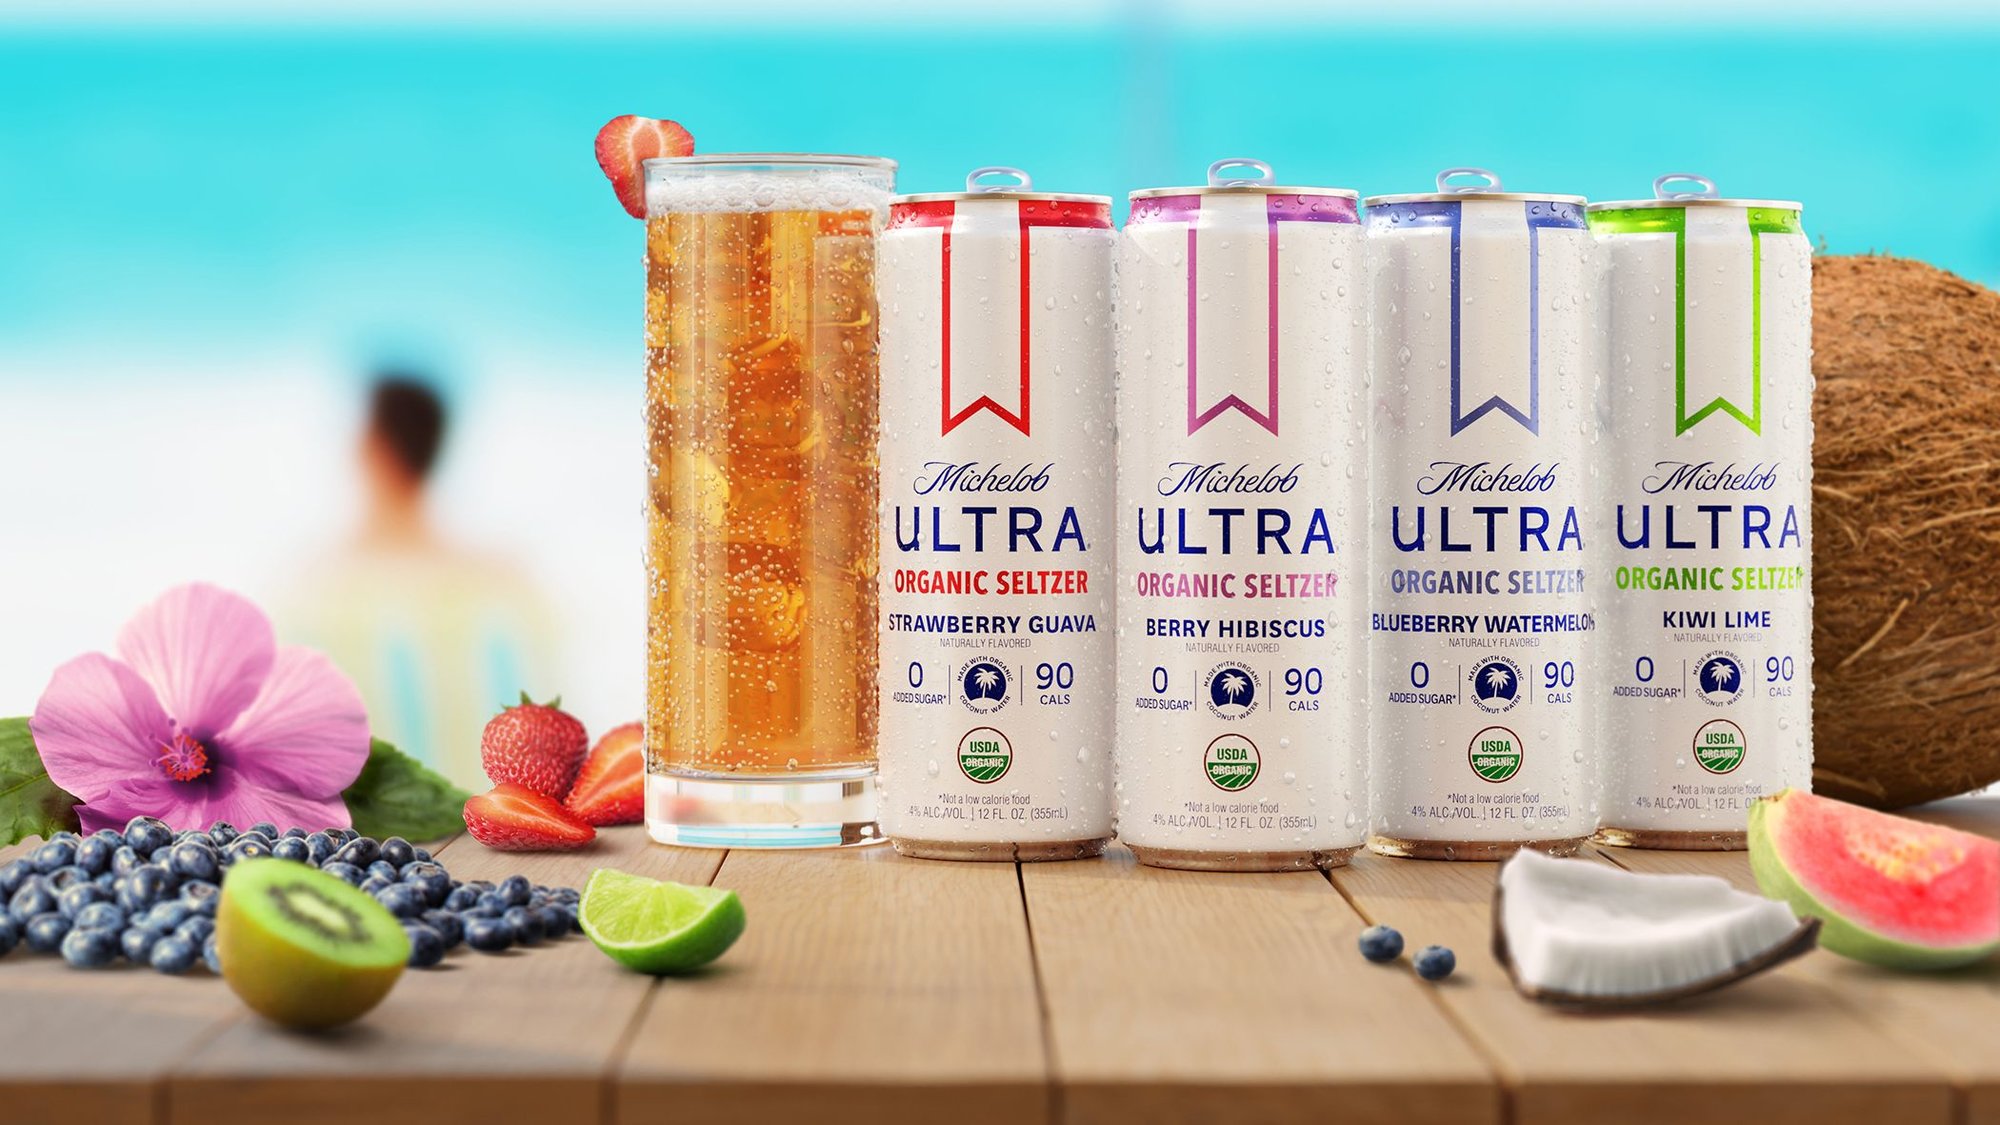 This is the main background for the Michelob Ultra Organic Seltzer Blueberry Watermelon